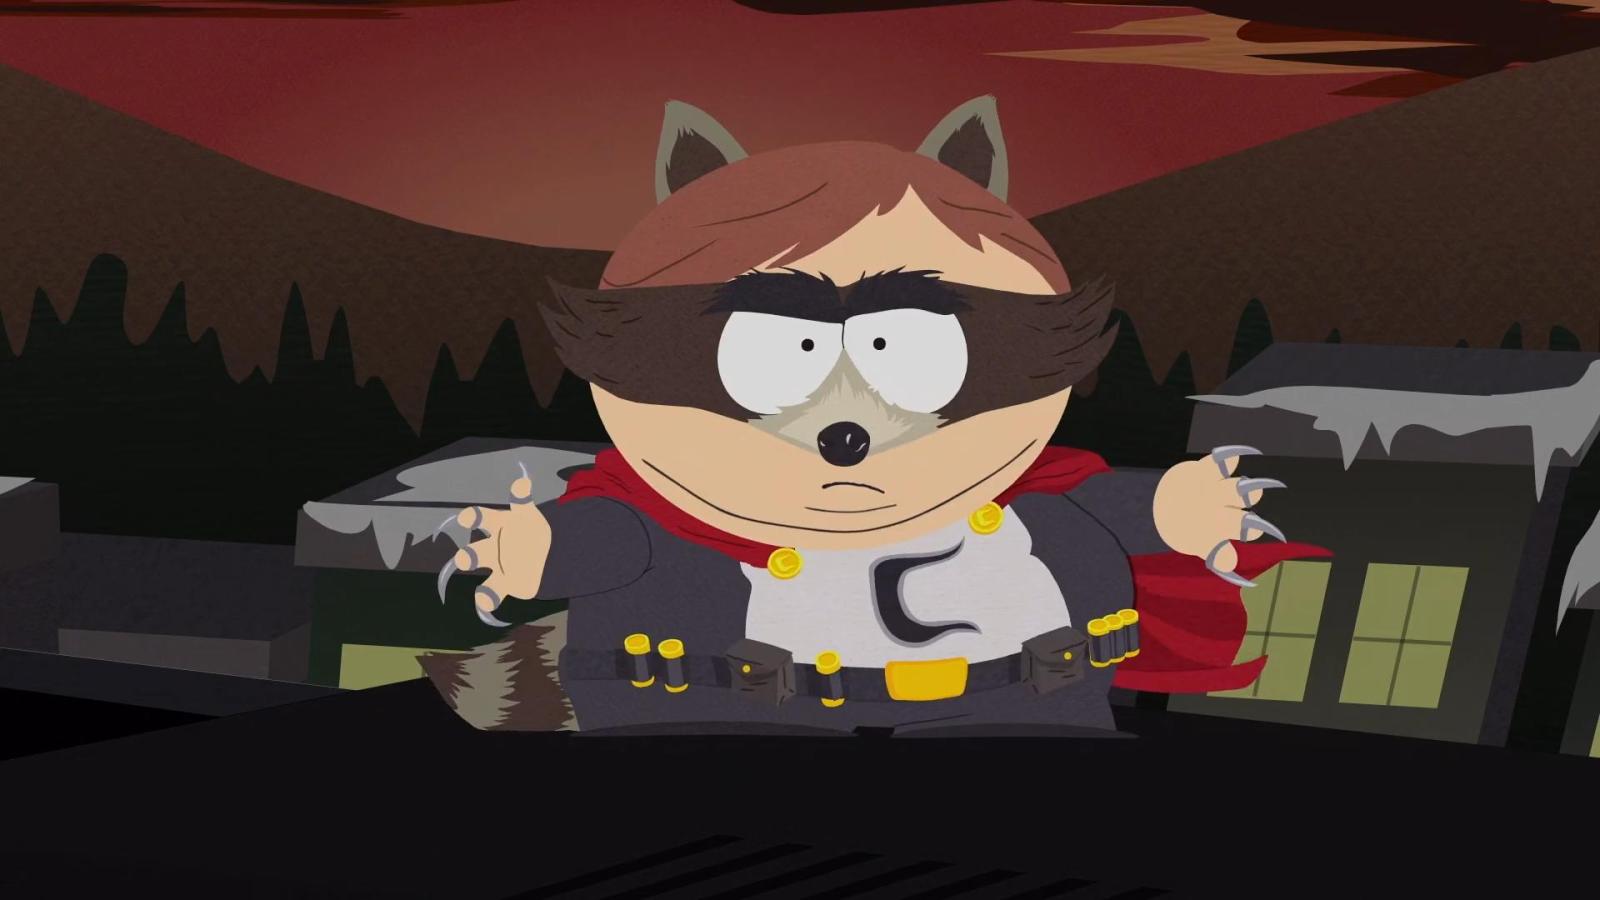 15 Funniest South Park Episodes of All Time, Ranked - image 15